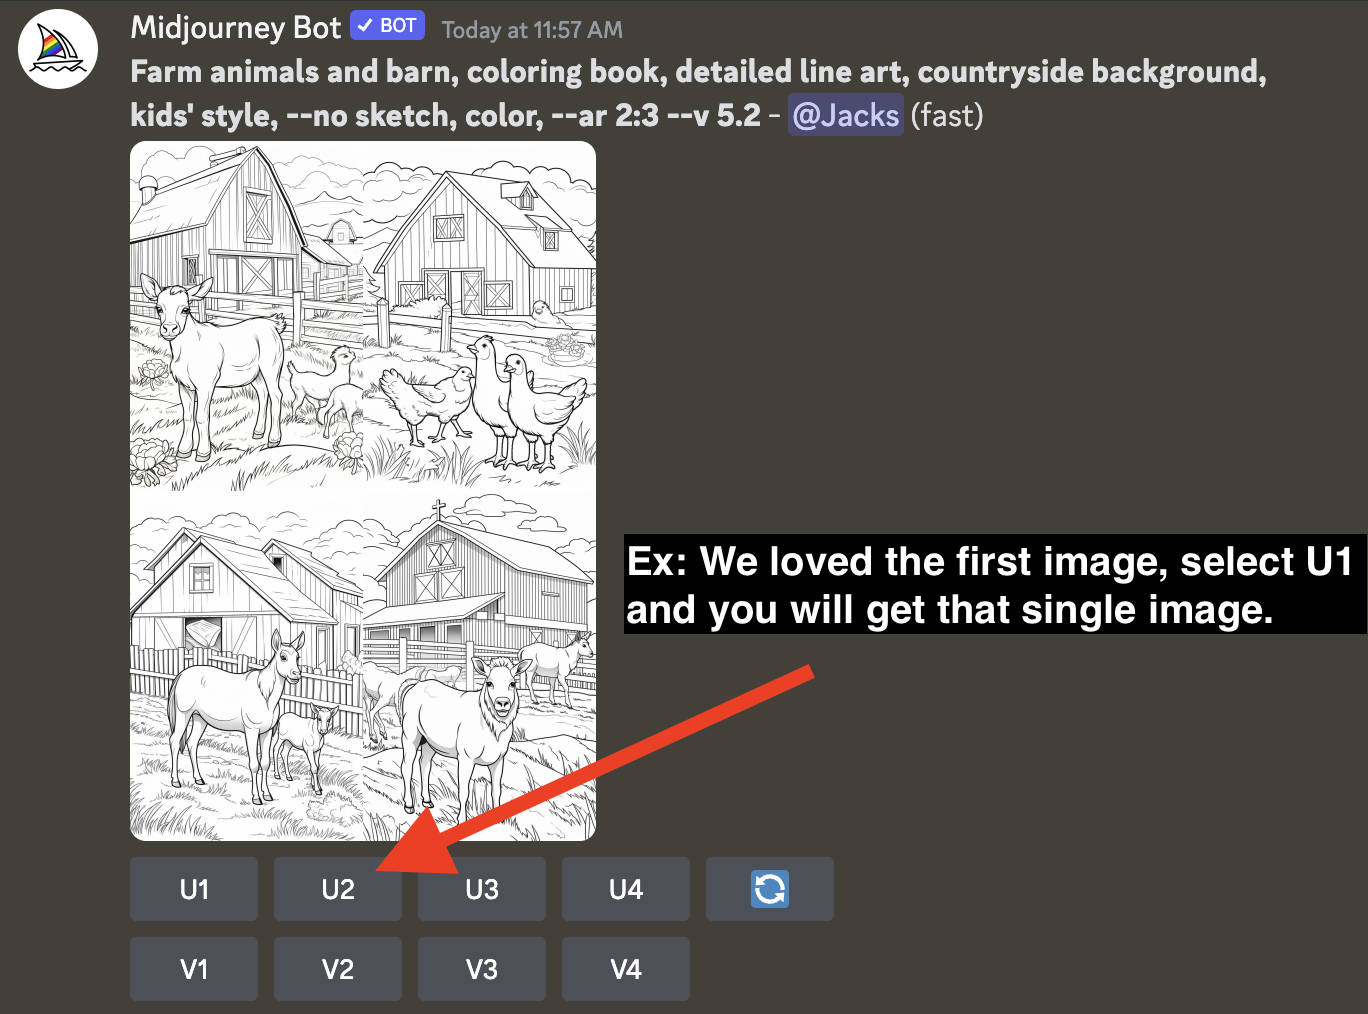 20 Midjourney prompts for coloring book pages (that you can print out  yourself) : r/midjourney